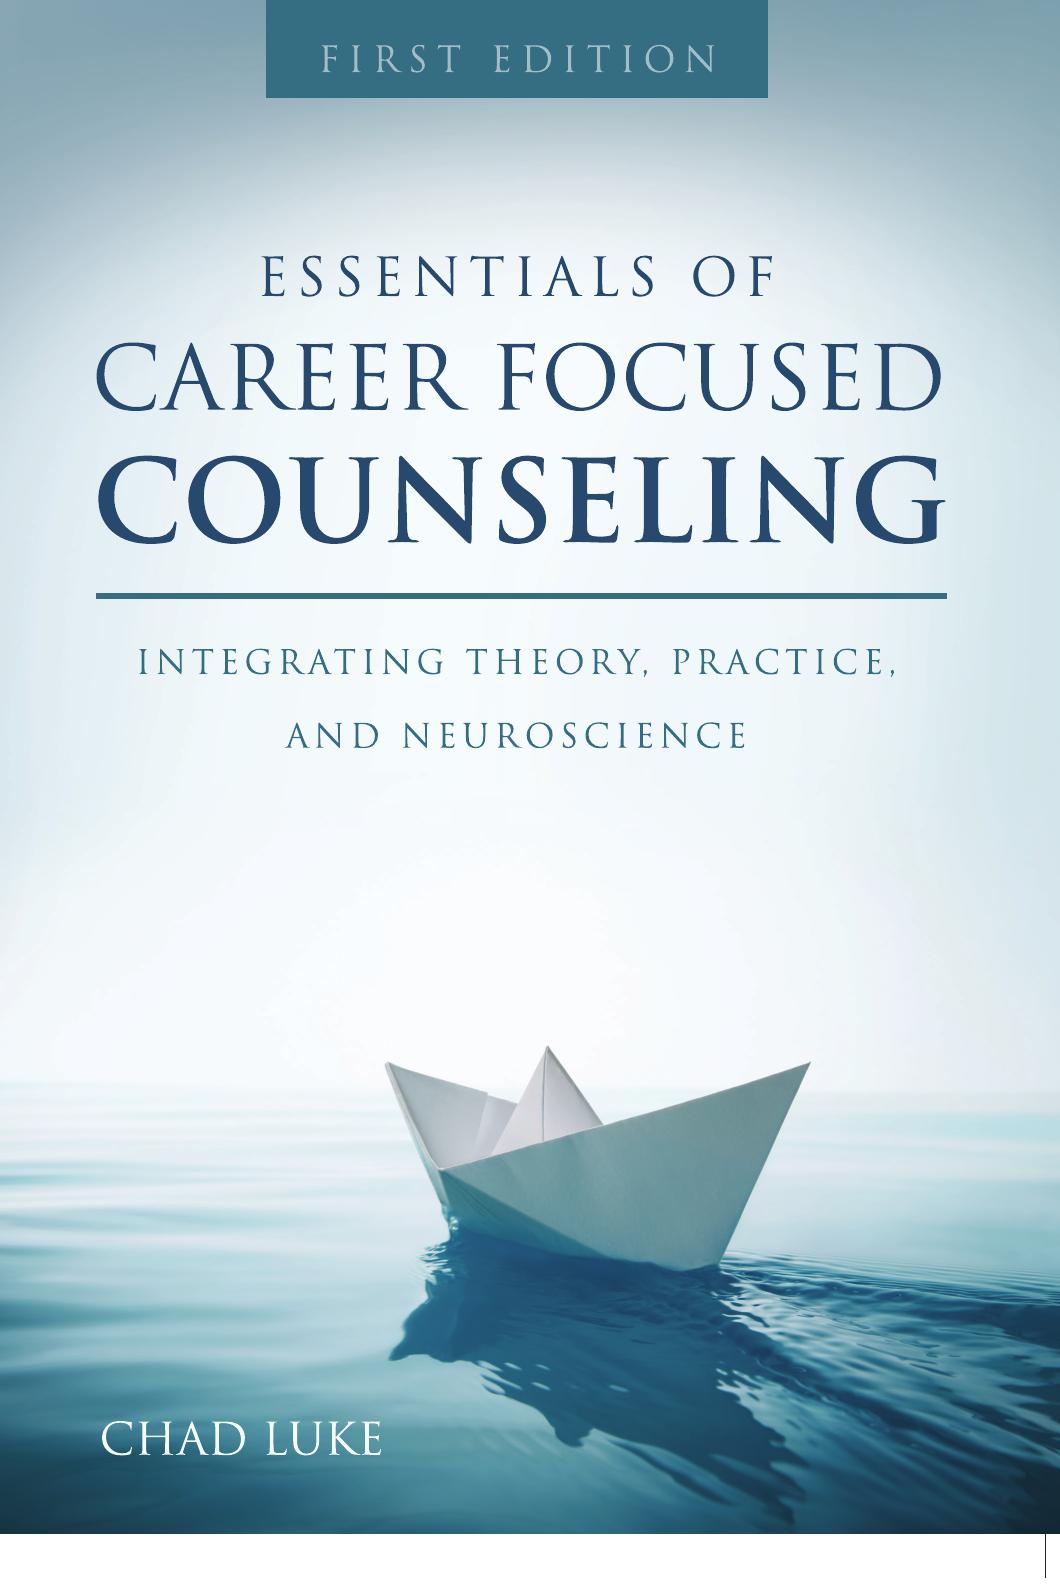 (eBook PDF)Essentials of Career Focused Counseling: Integrating Theory, Practice, and Neuroscience by Chad Luke